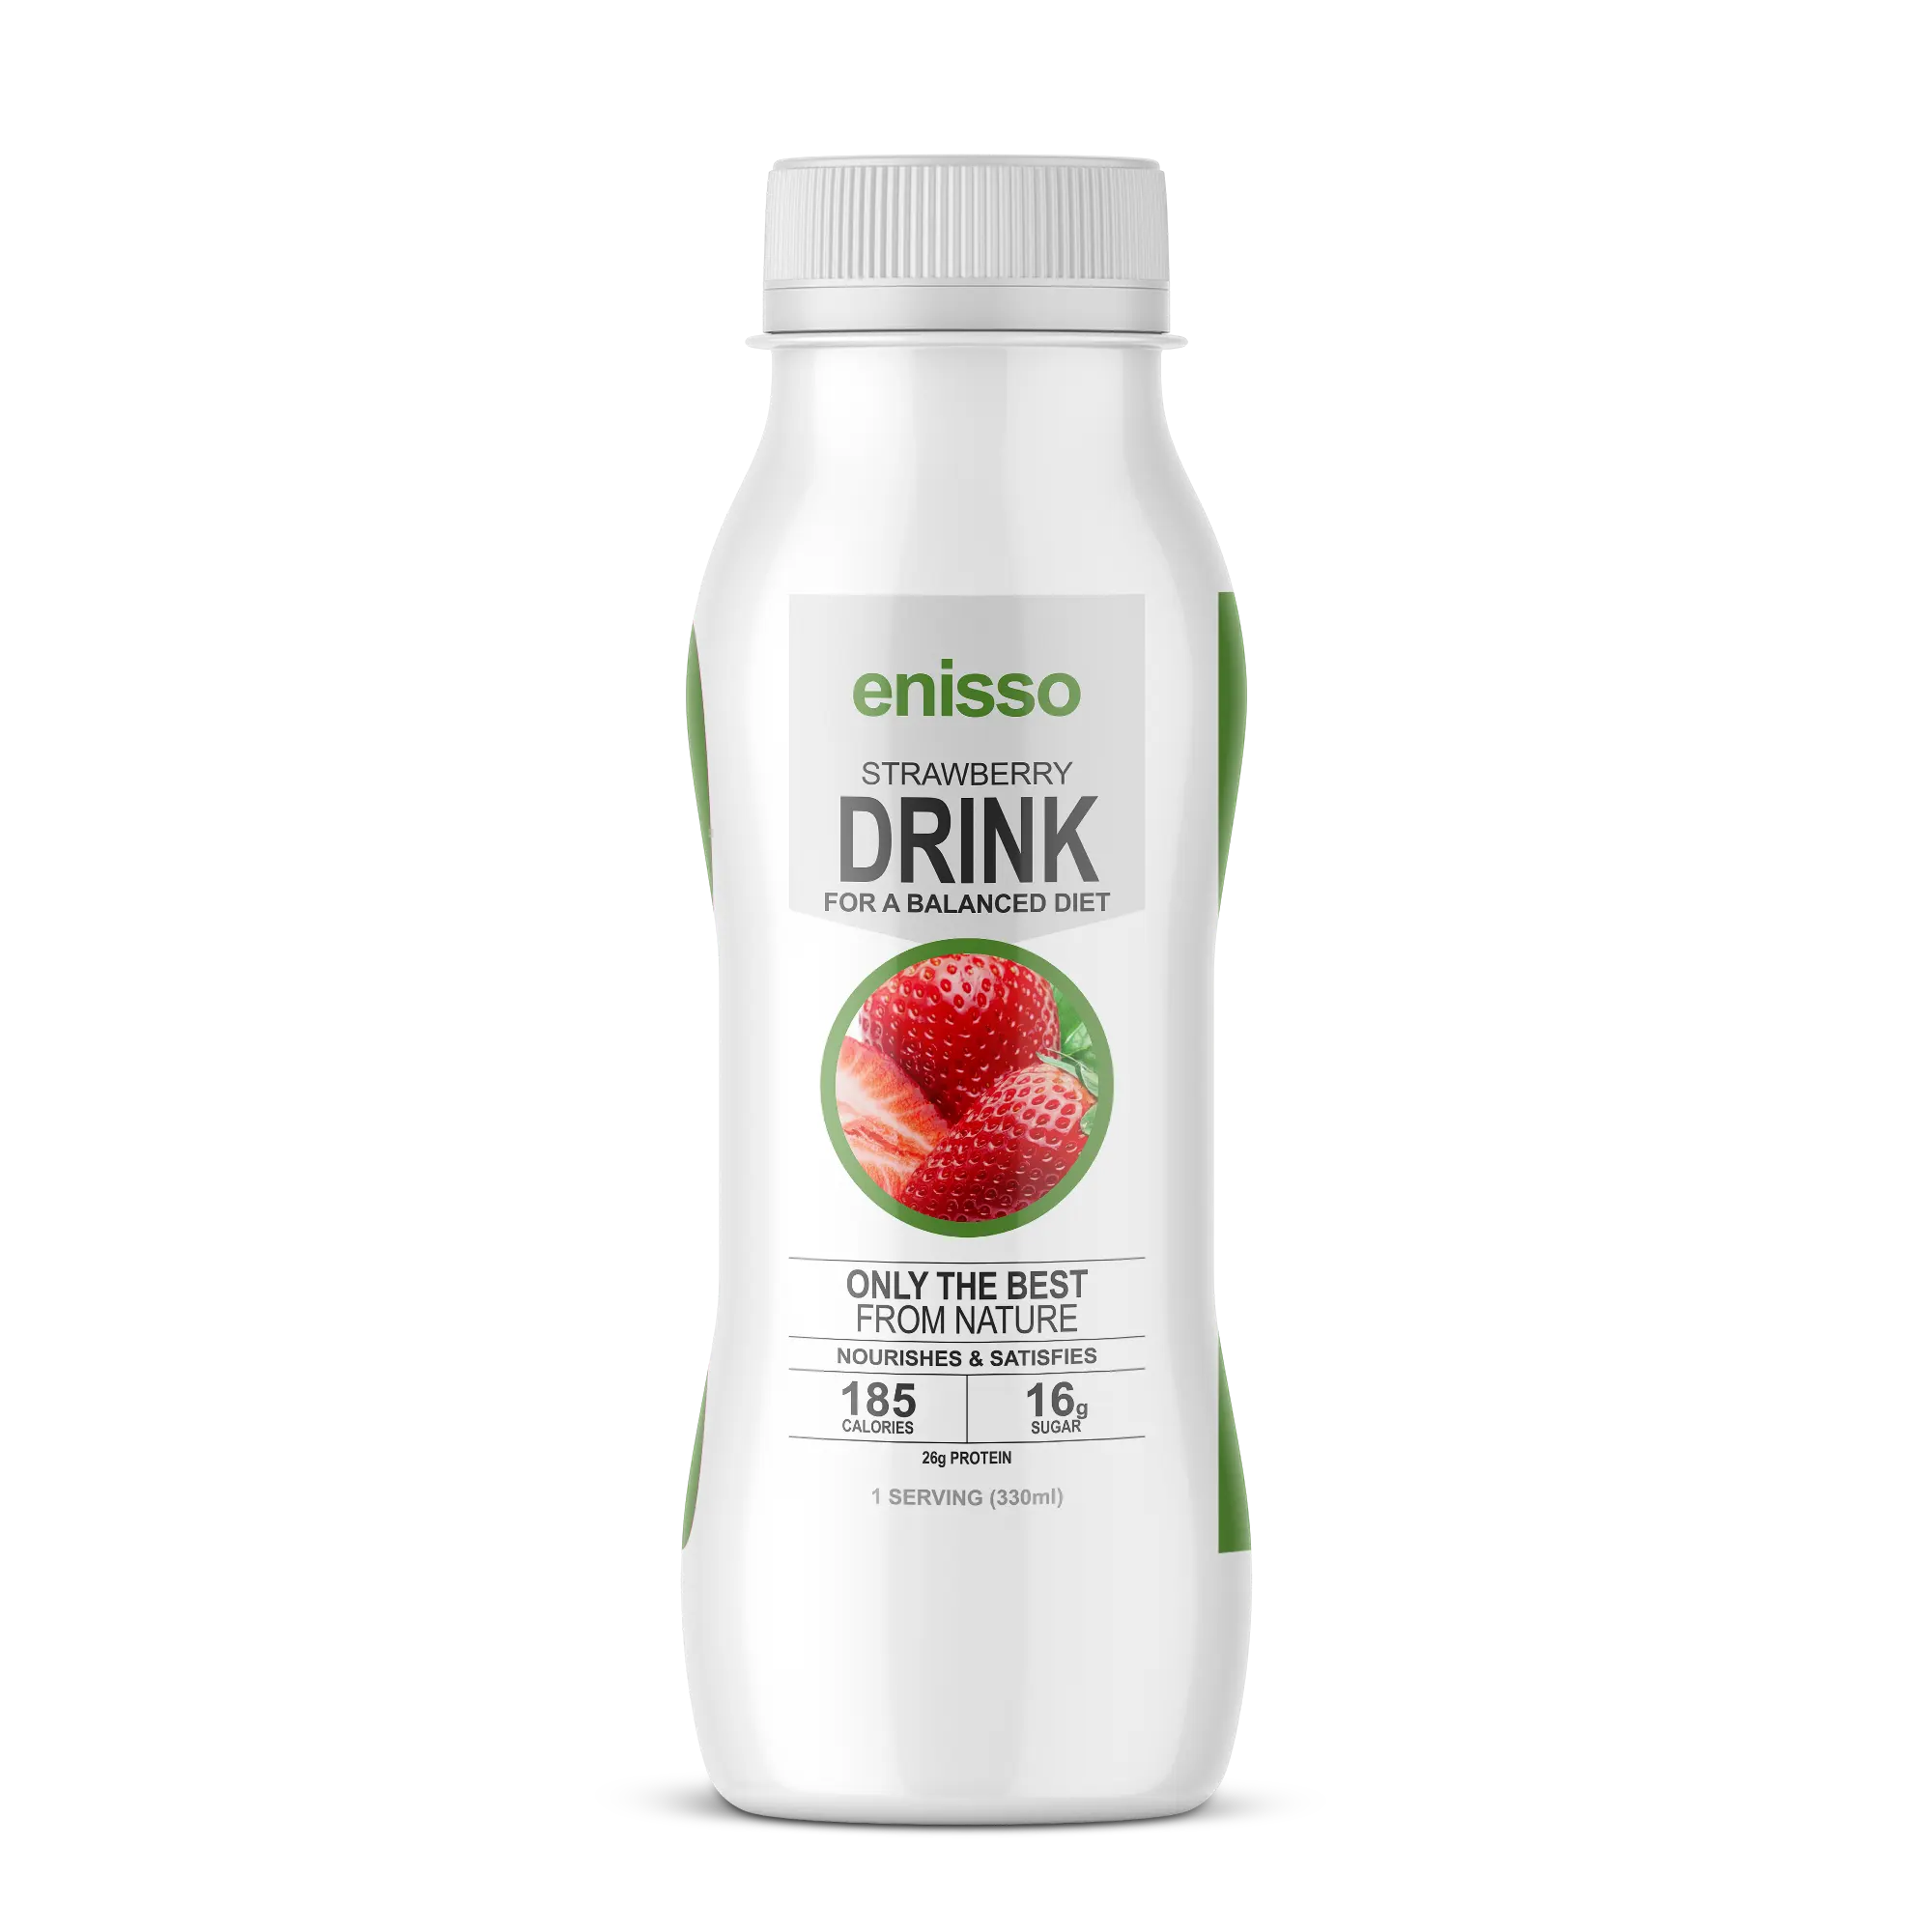 Enisso Weightloss Slimming Protein Drink Shake RTD Fitness Healthy Diet Food OEM OBM Private Label